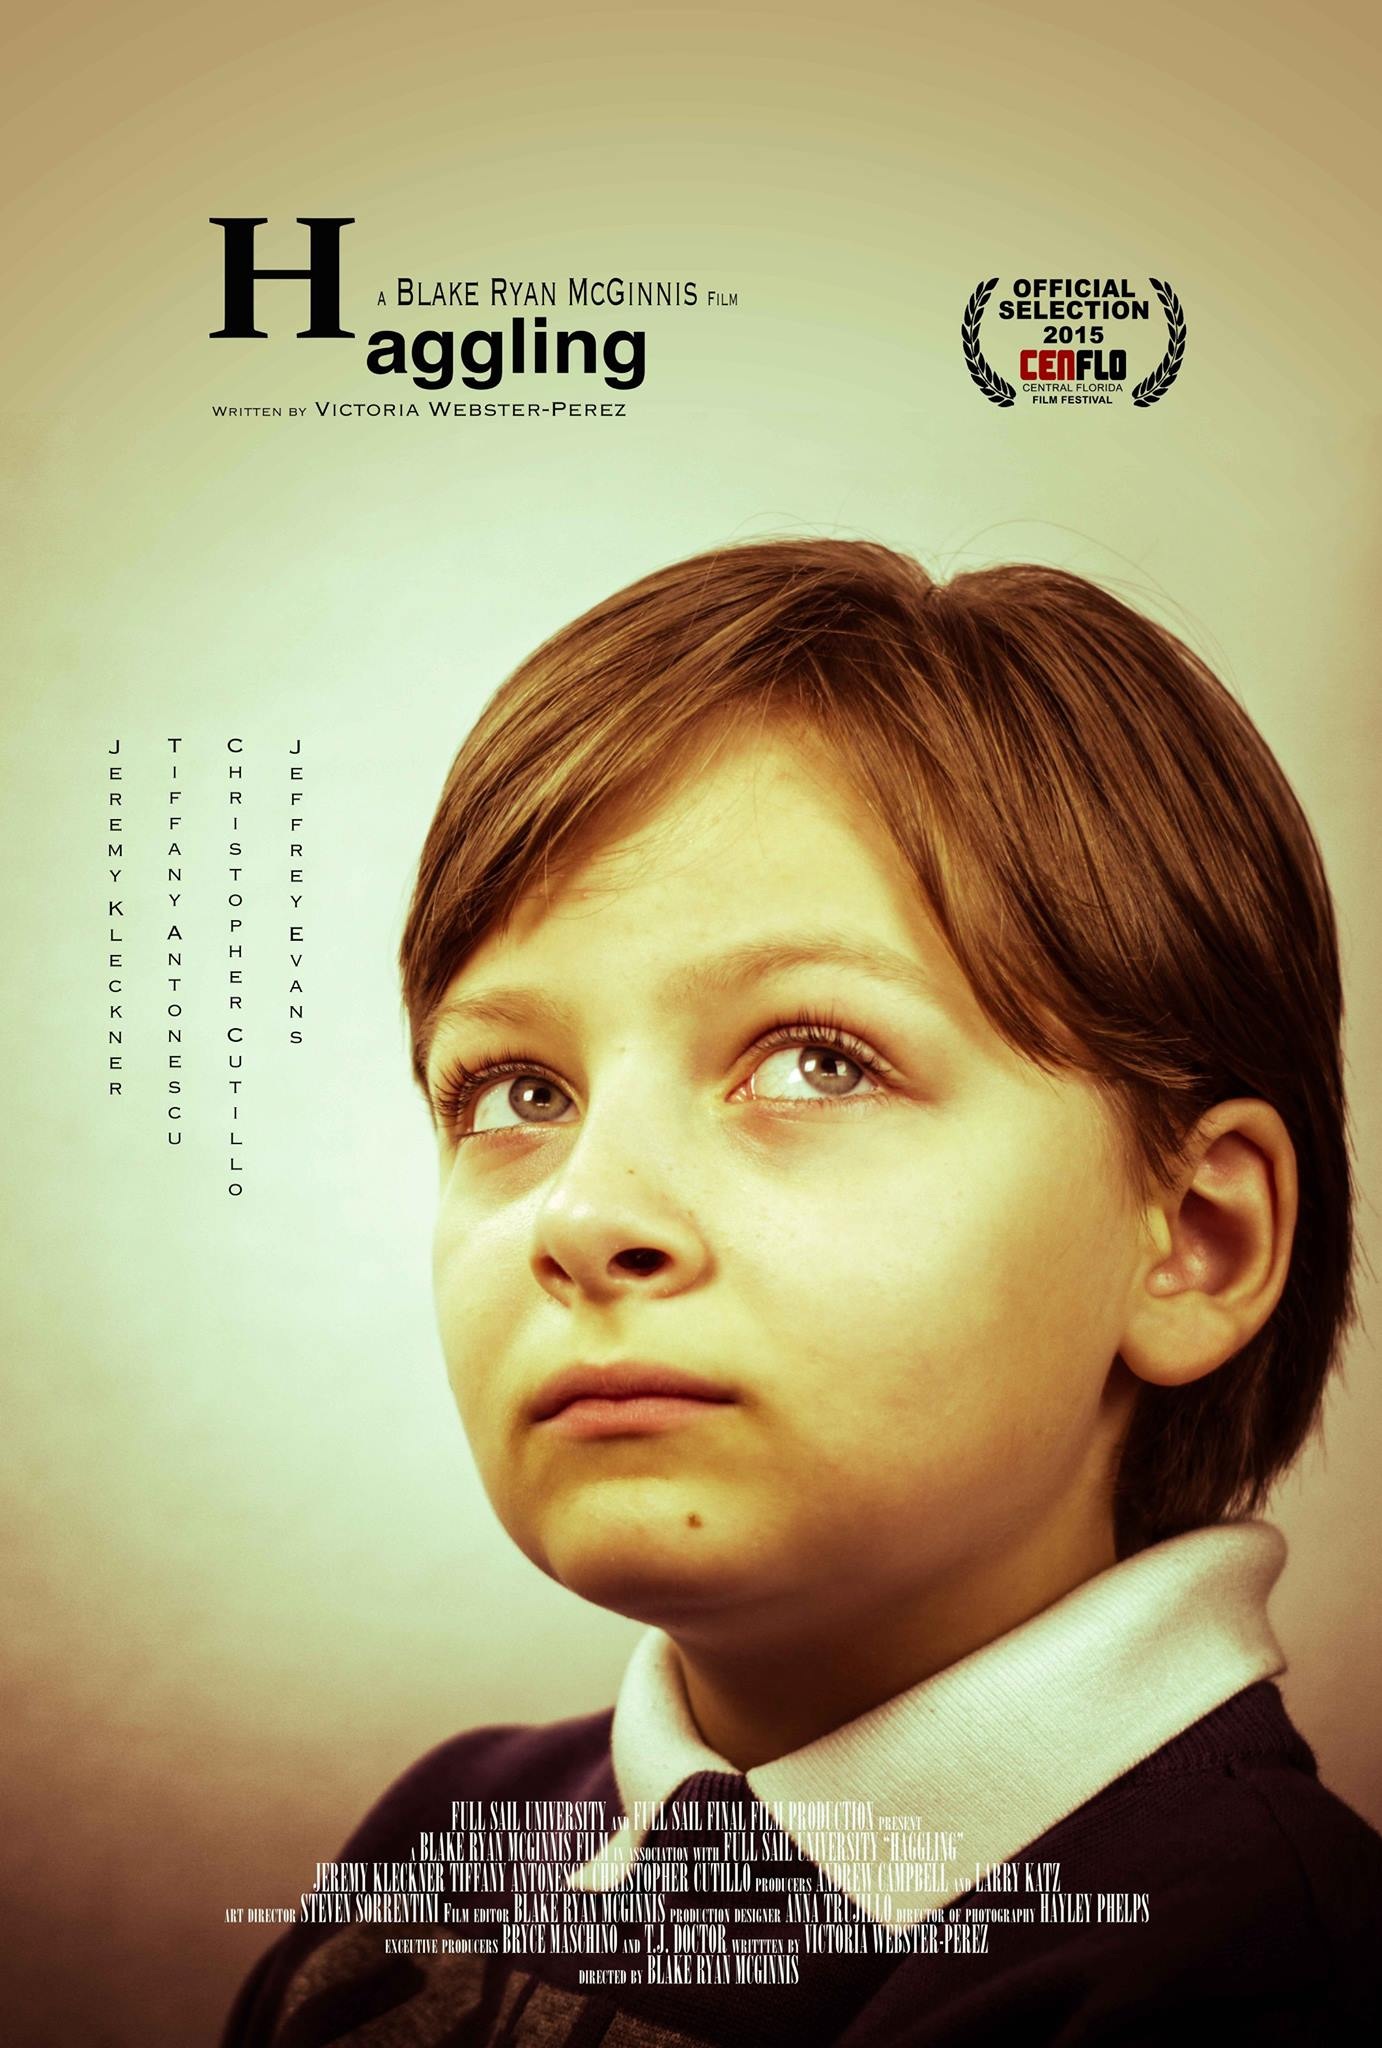 Official Movie Poster for Haggling